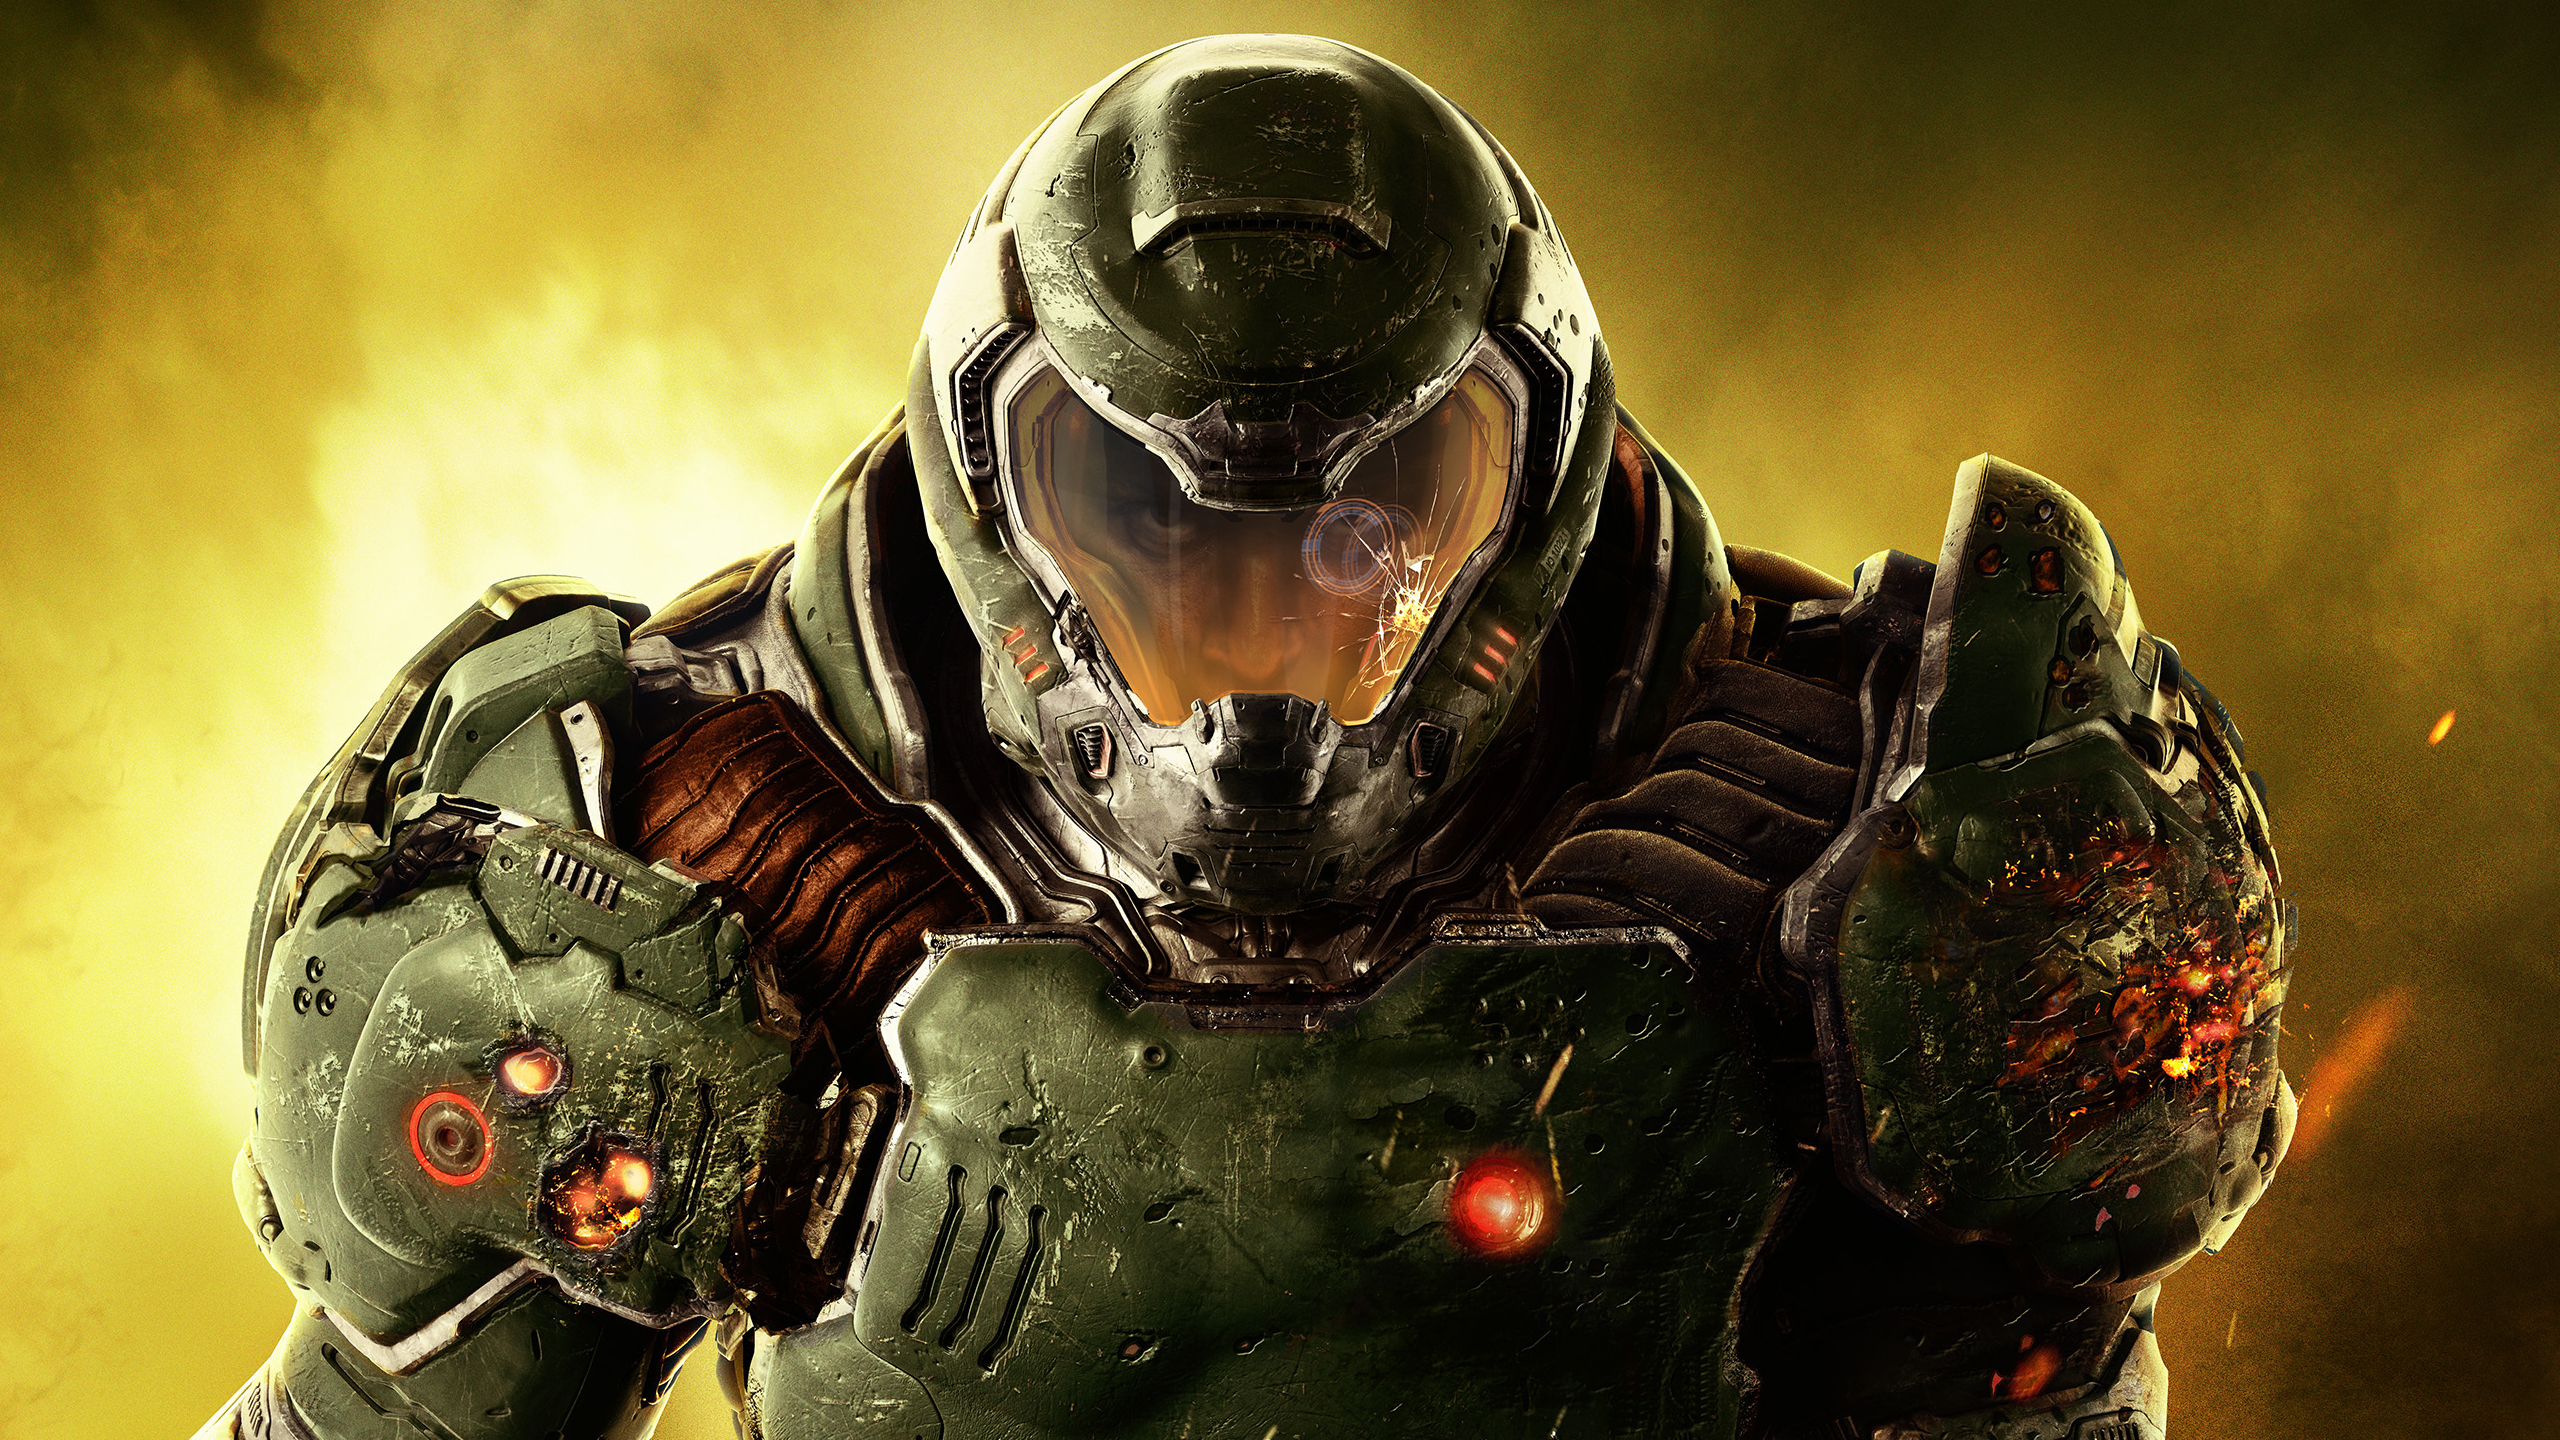 Doom 2016 Wallpapers, Pictures, Images